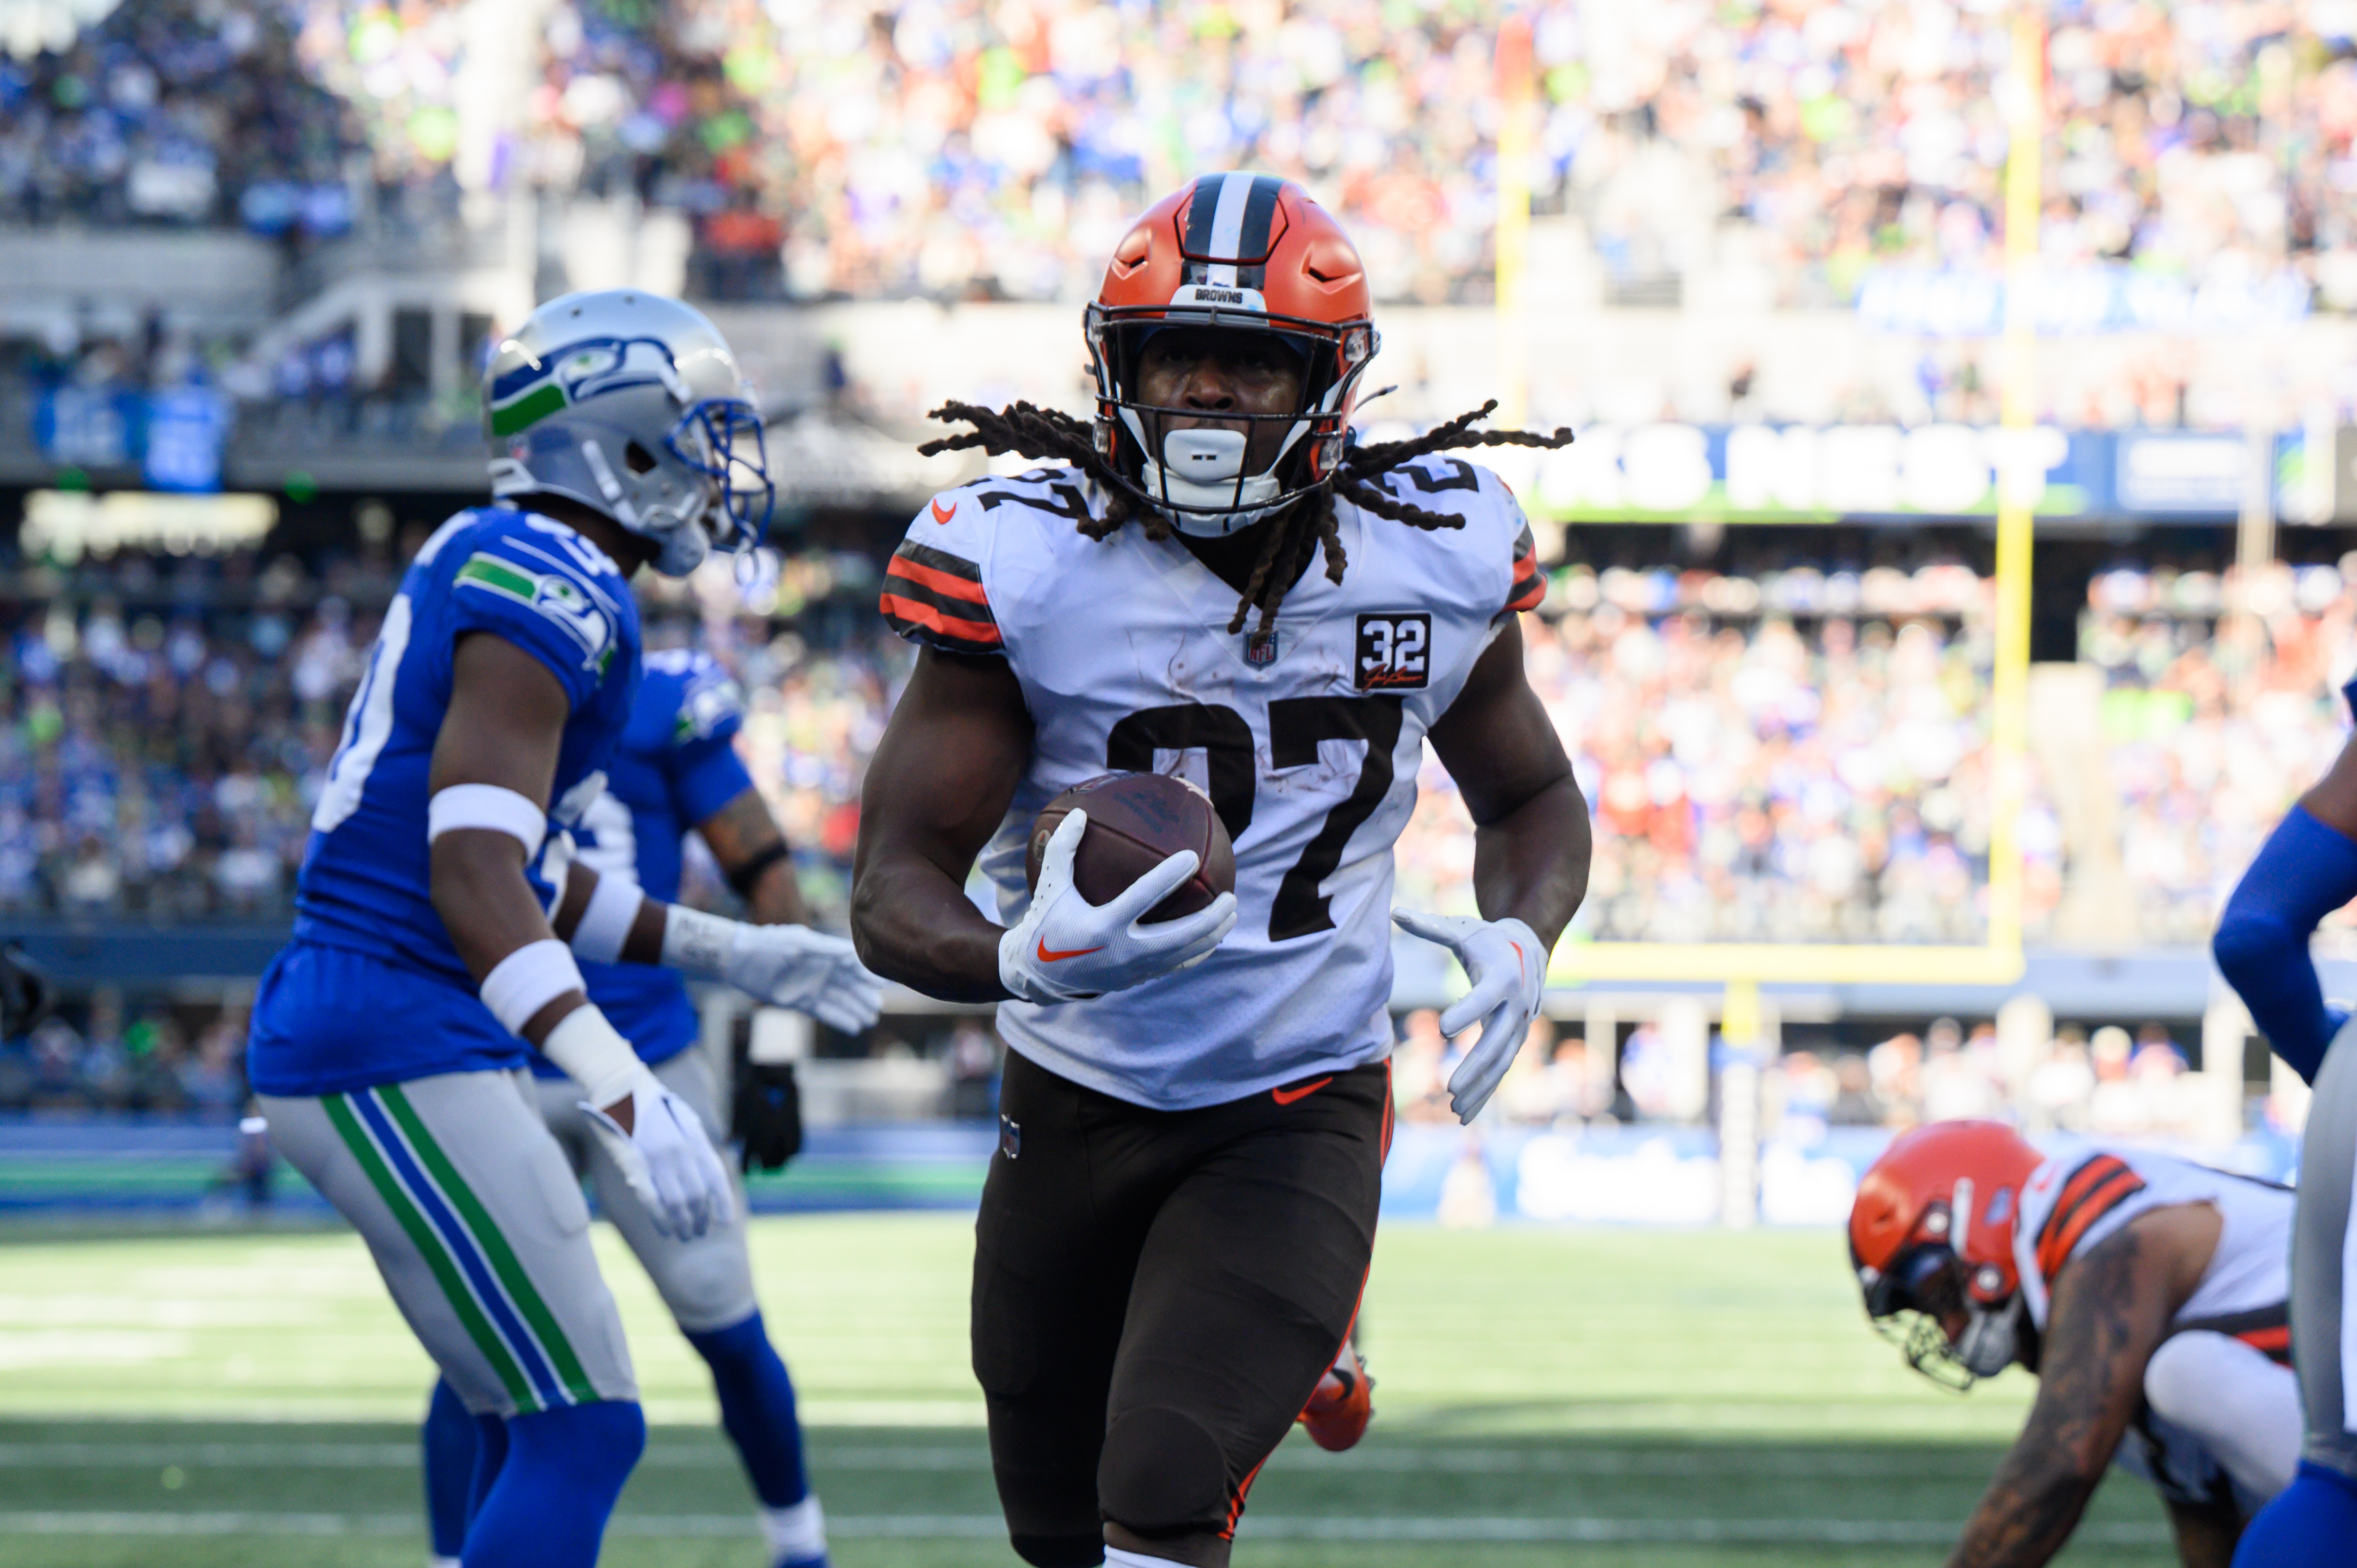 NFL: Cleveland Browns at Seattle Seahawks